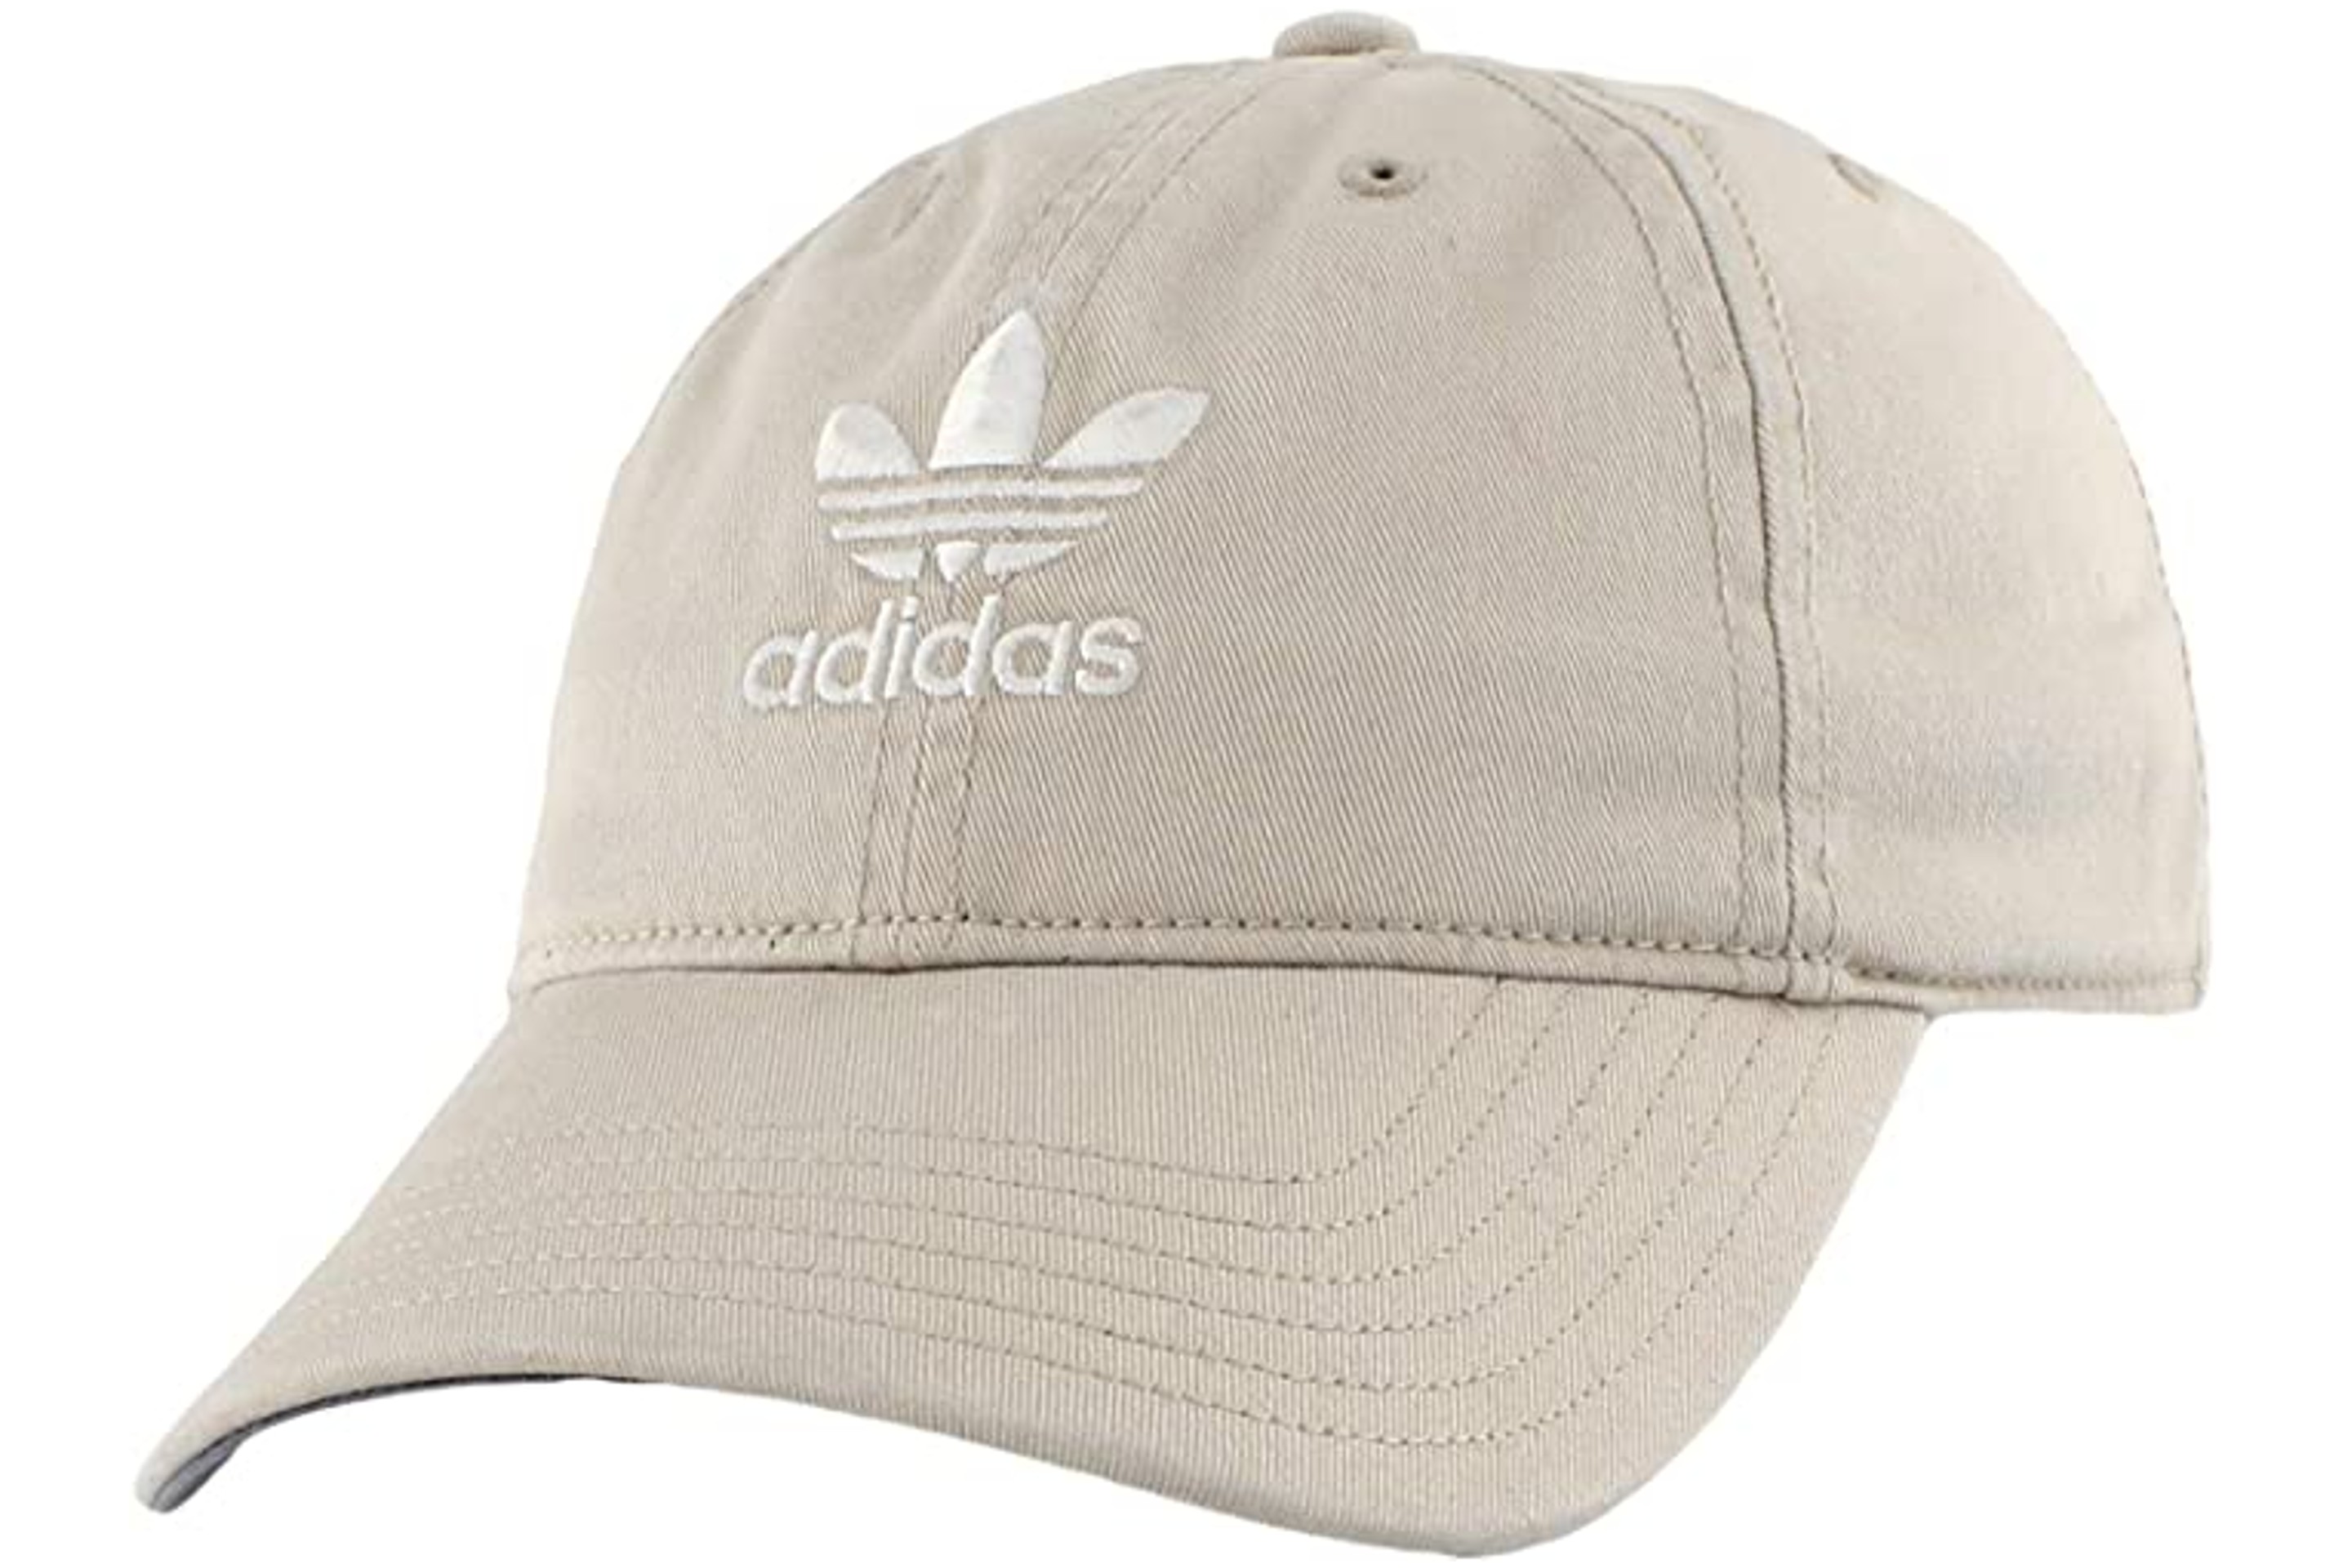 Shop and Save on Adidas Hats, Bags, and More